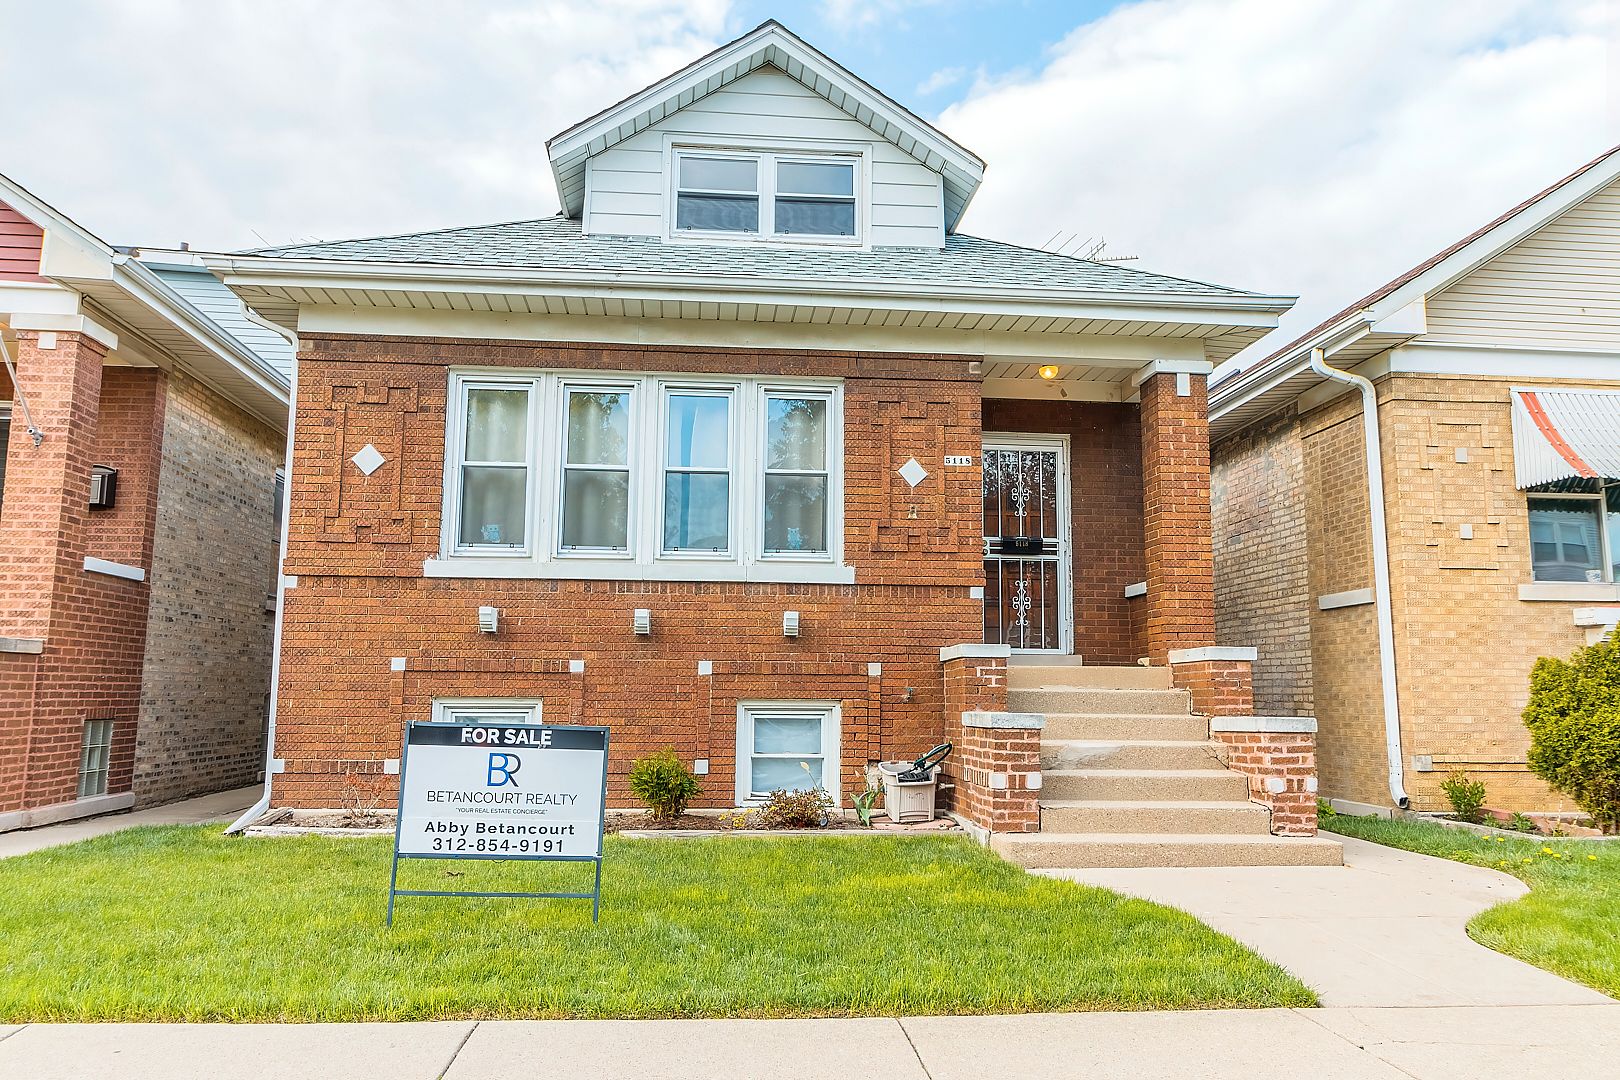 Main Photo: 5118 W Barry Avenue in Chicago: CHI - Belmont Cragin Residential for sale ()  : MLS®# 10840202